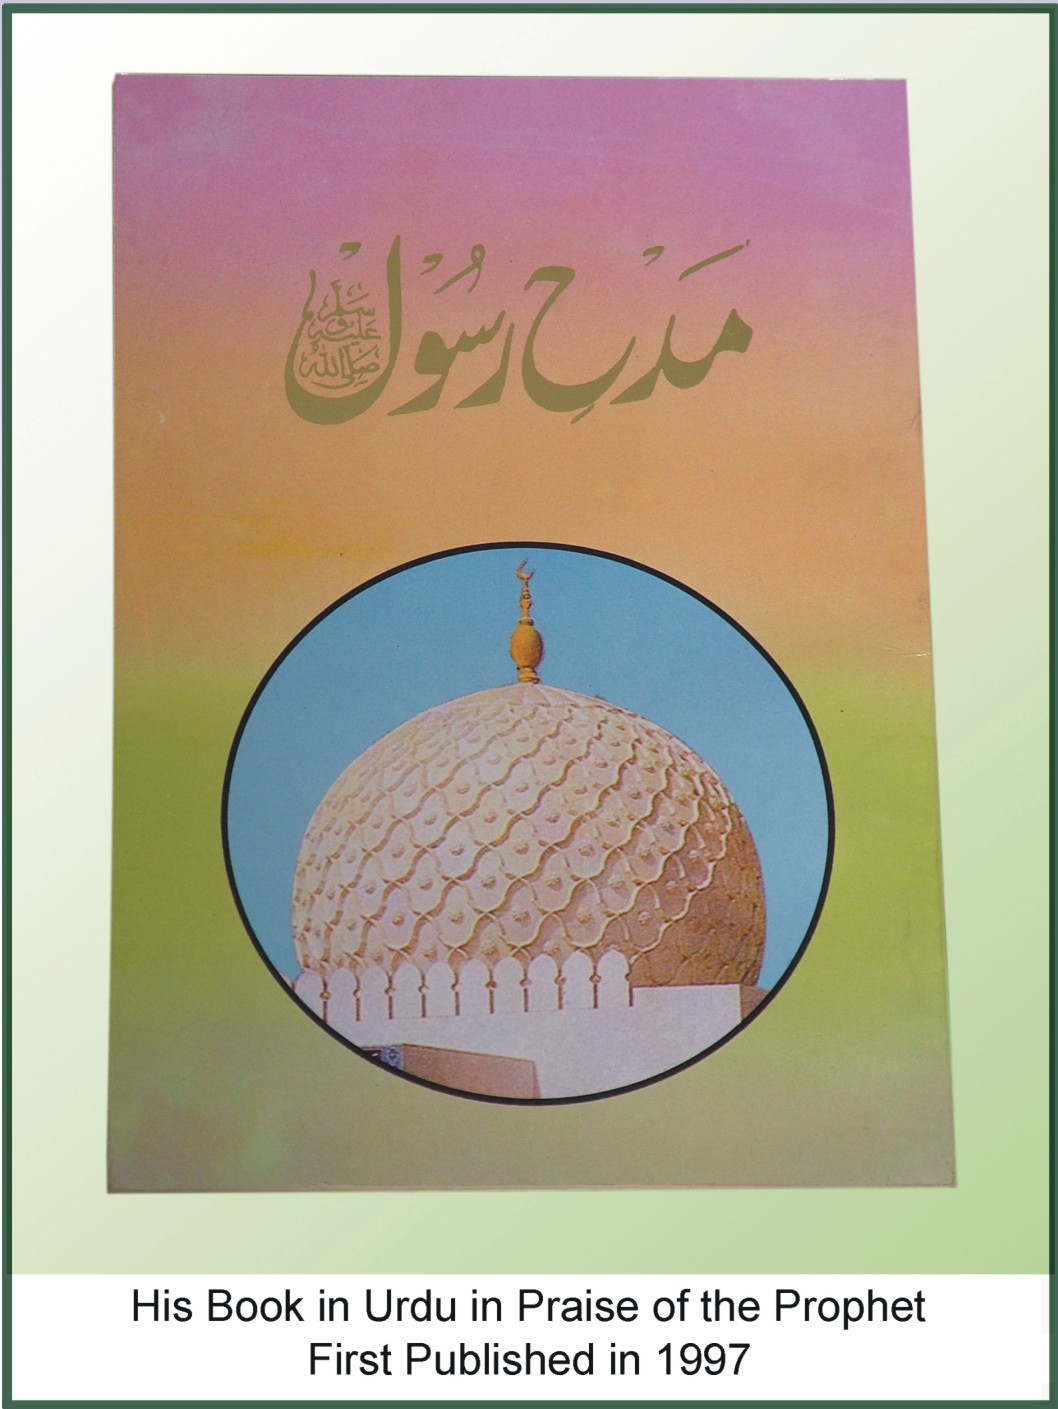 Praise of the Prophet PBUH (Urdu) First Published in 1997